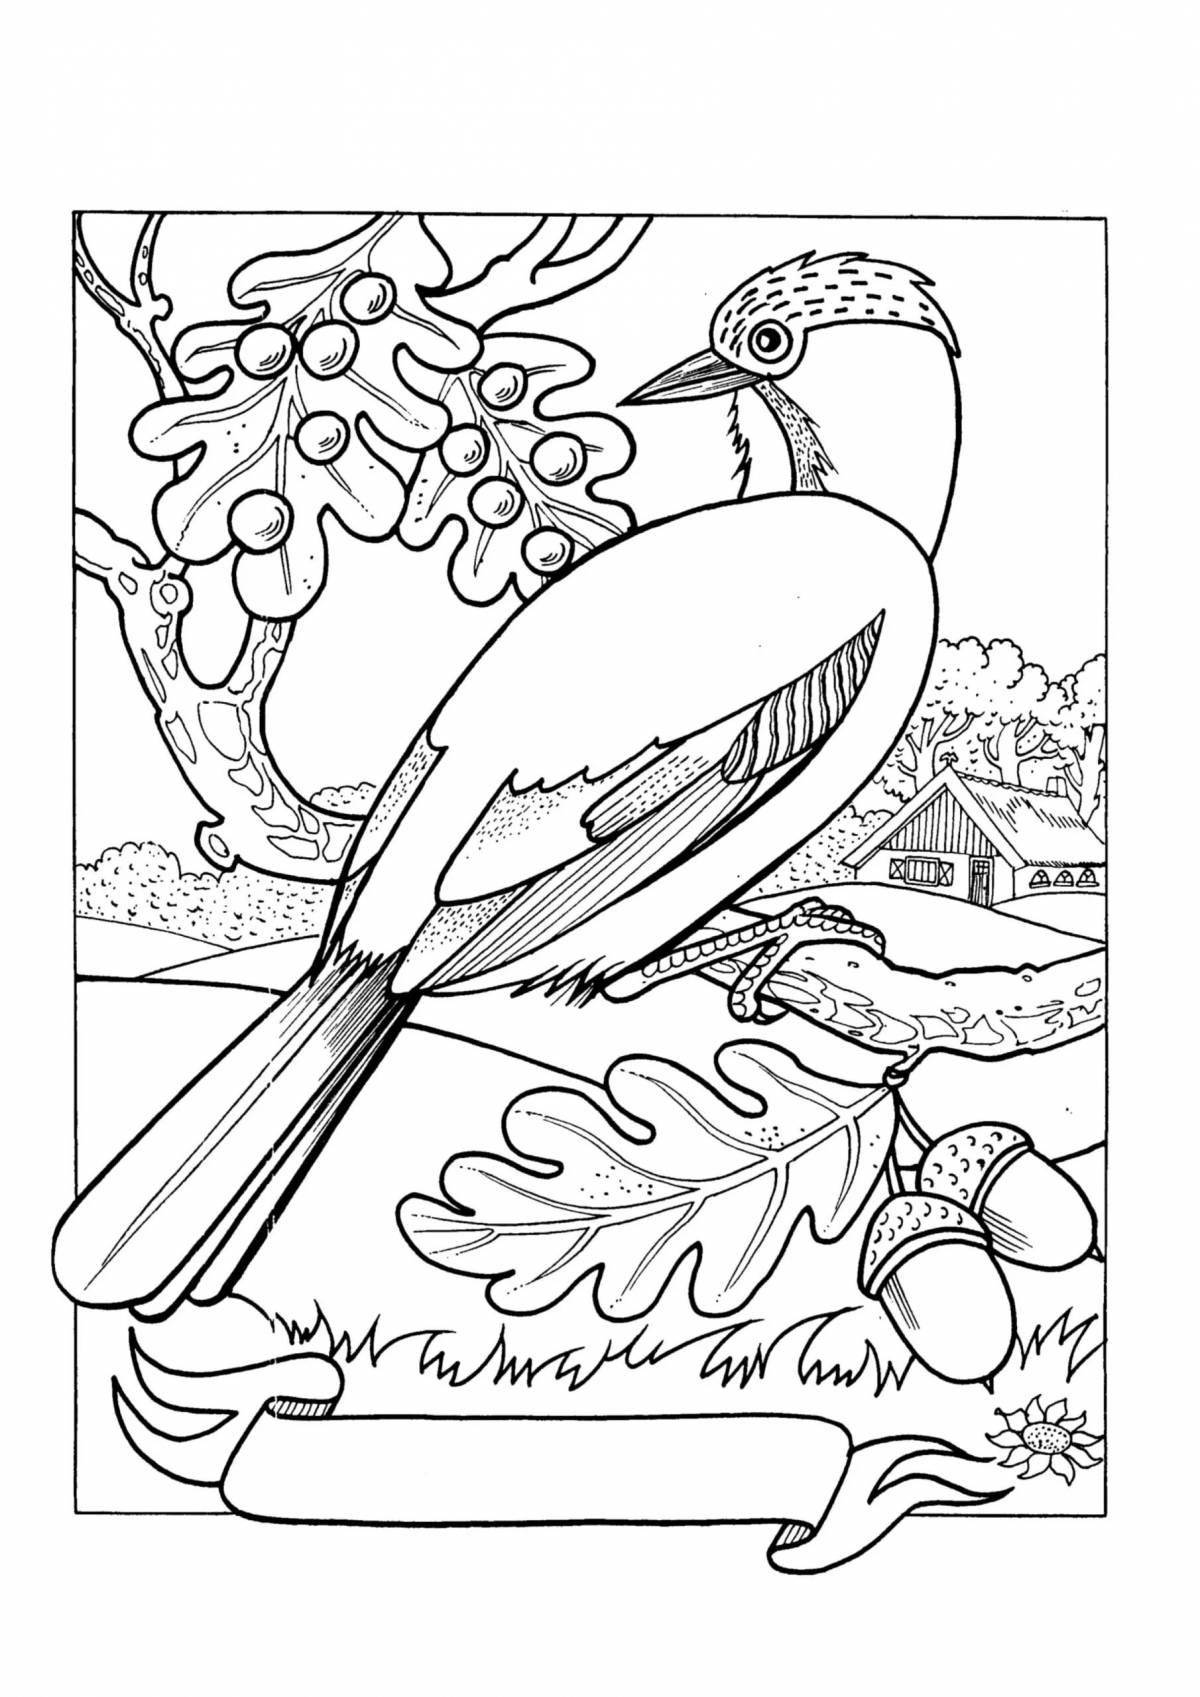 Glitter Tit Day coloring page